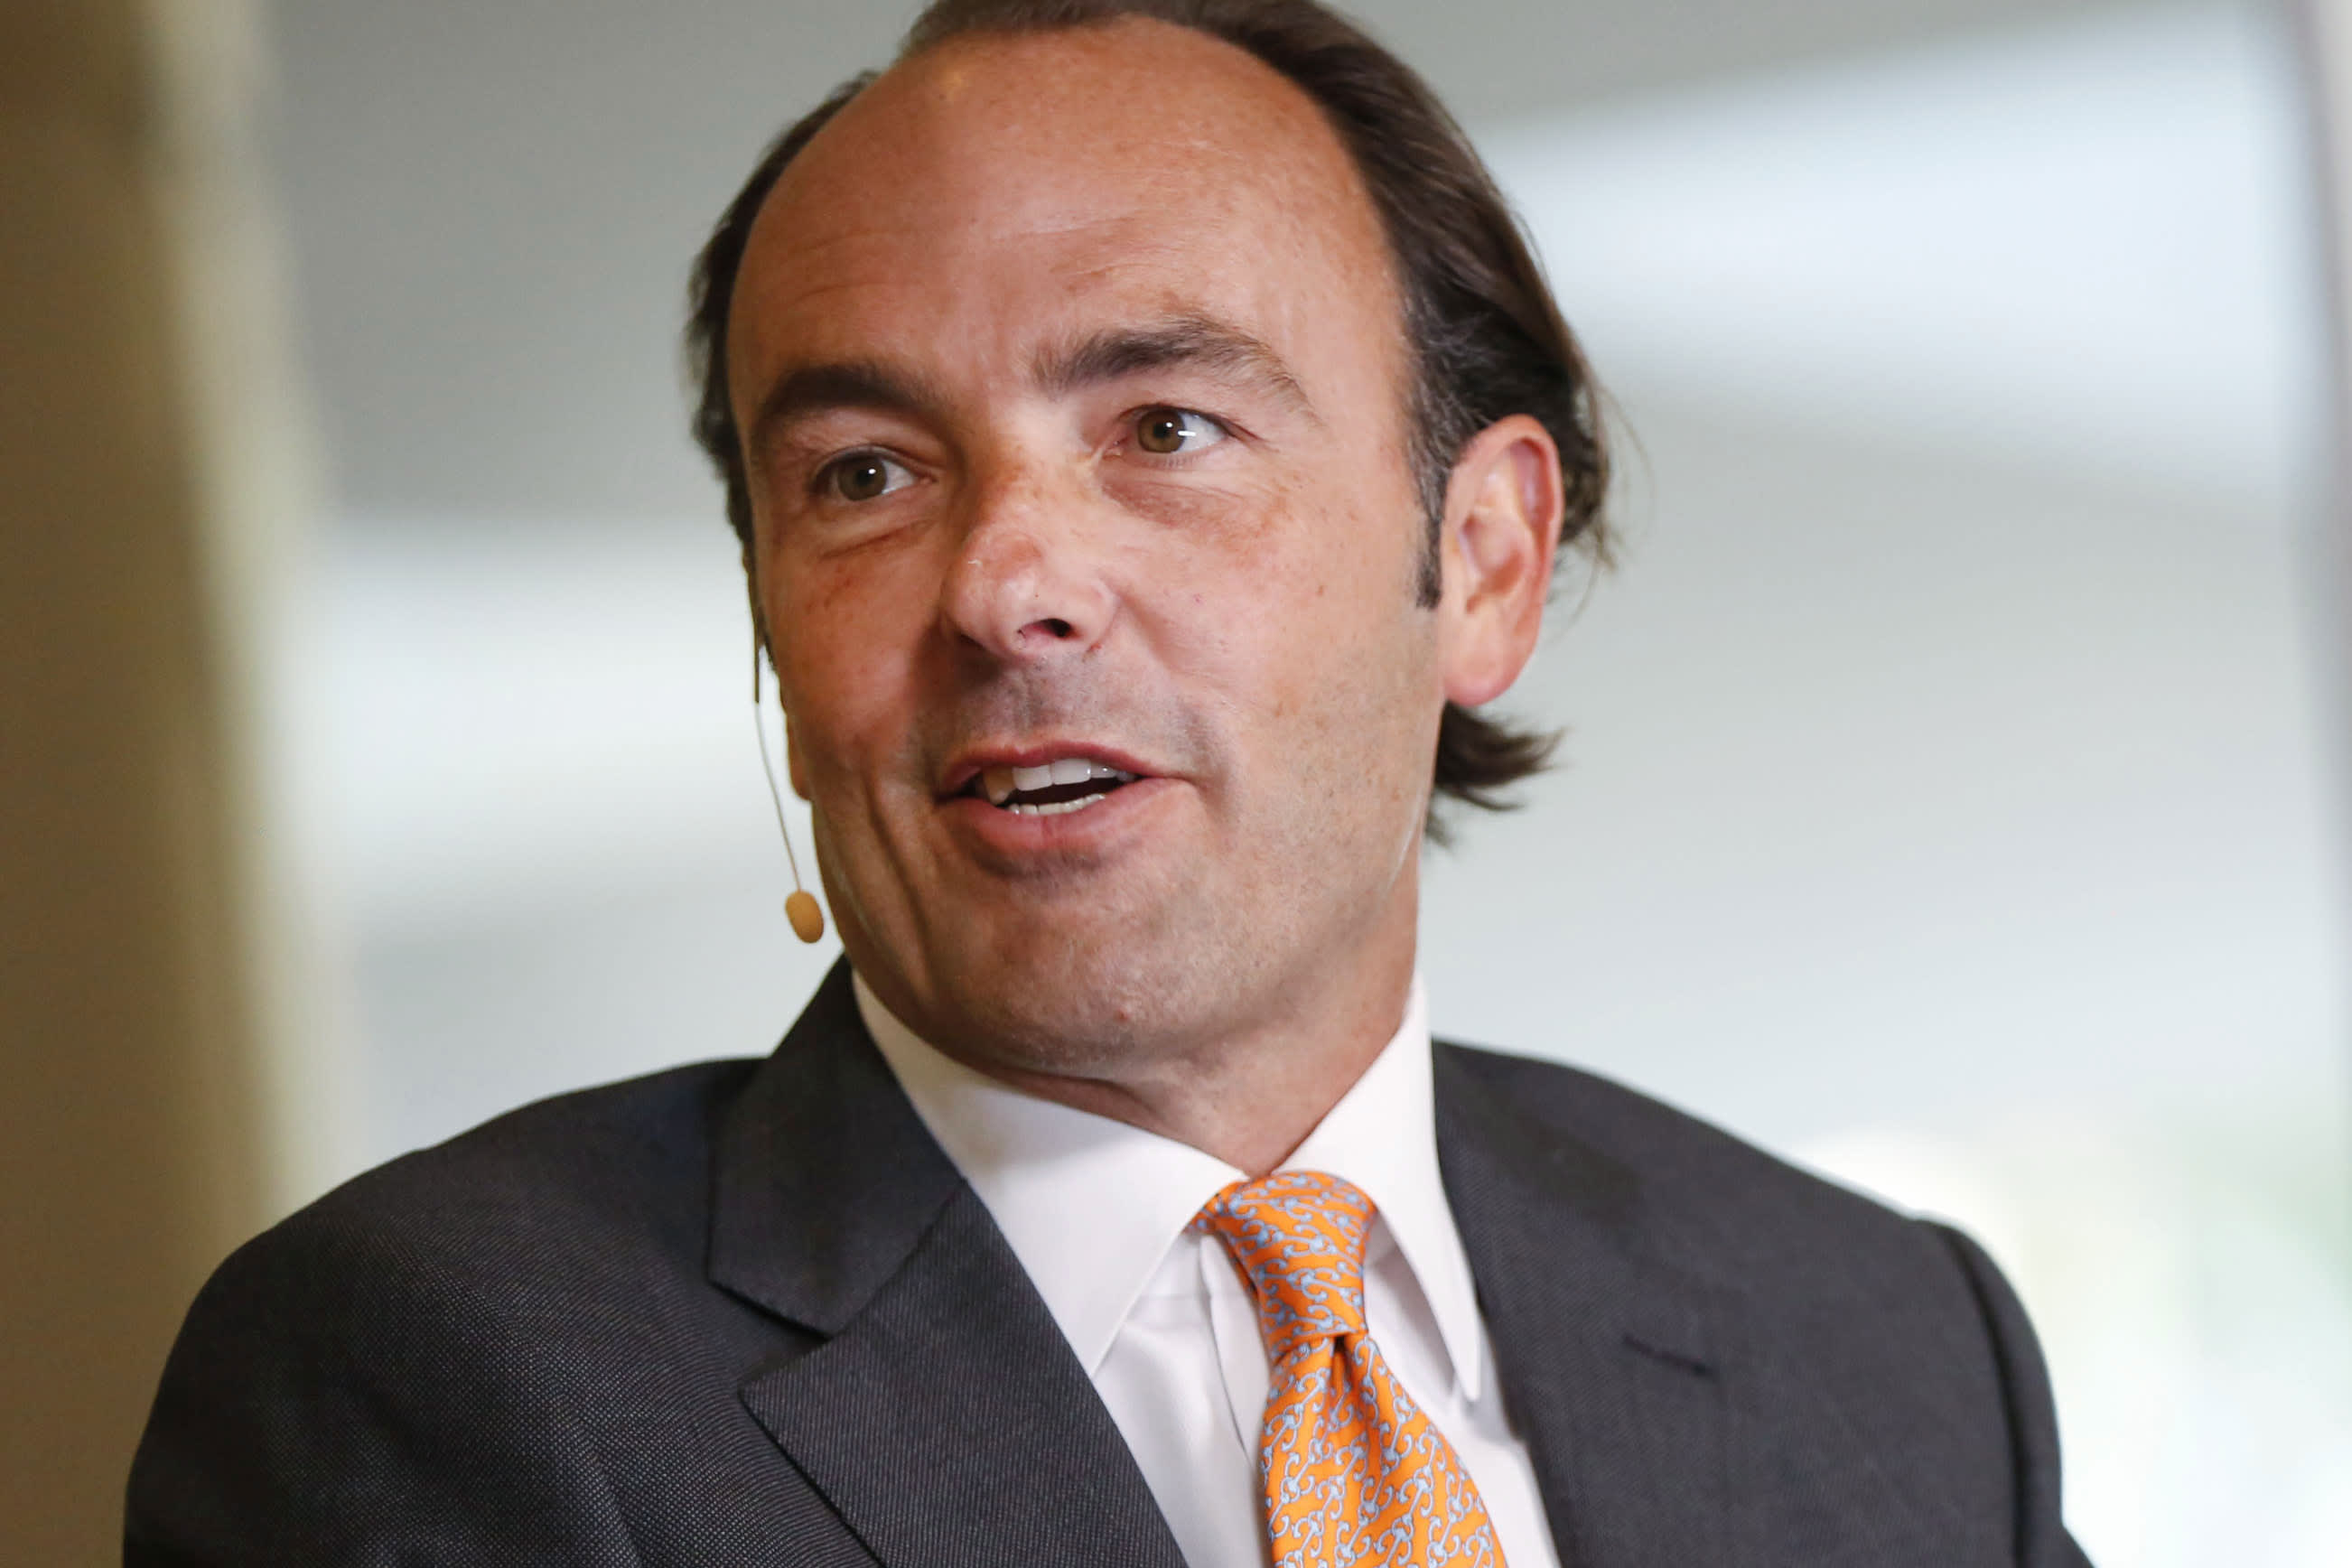 Investor Kyle Bass blasts U.S. companies for cozying up to China in the name of profits